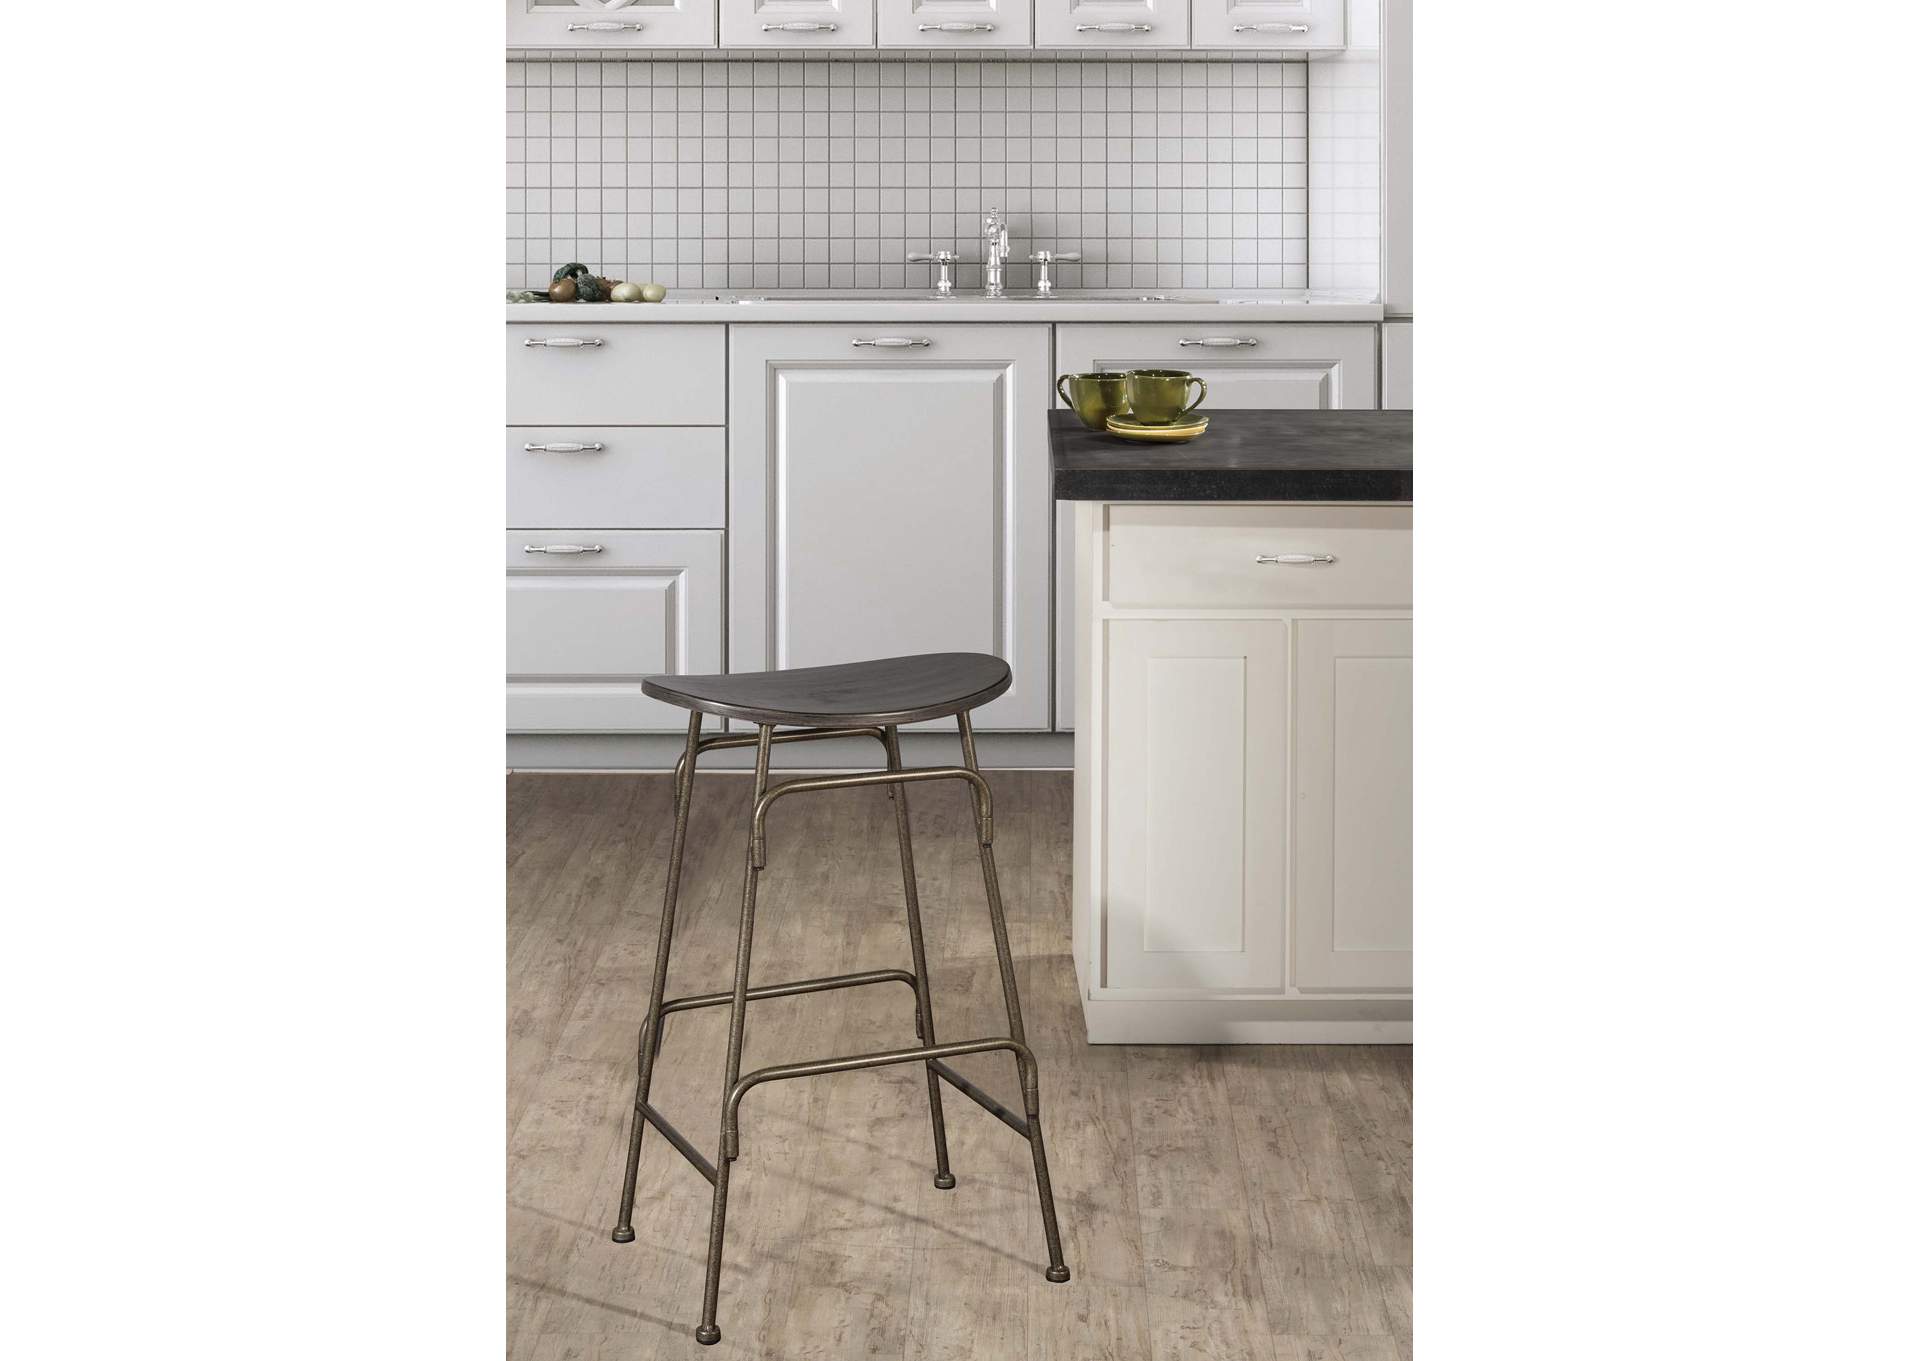 Mitchell Backless Counter Stool,Hillsdale